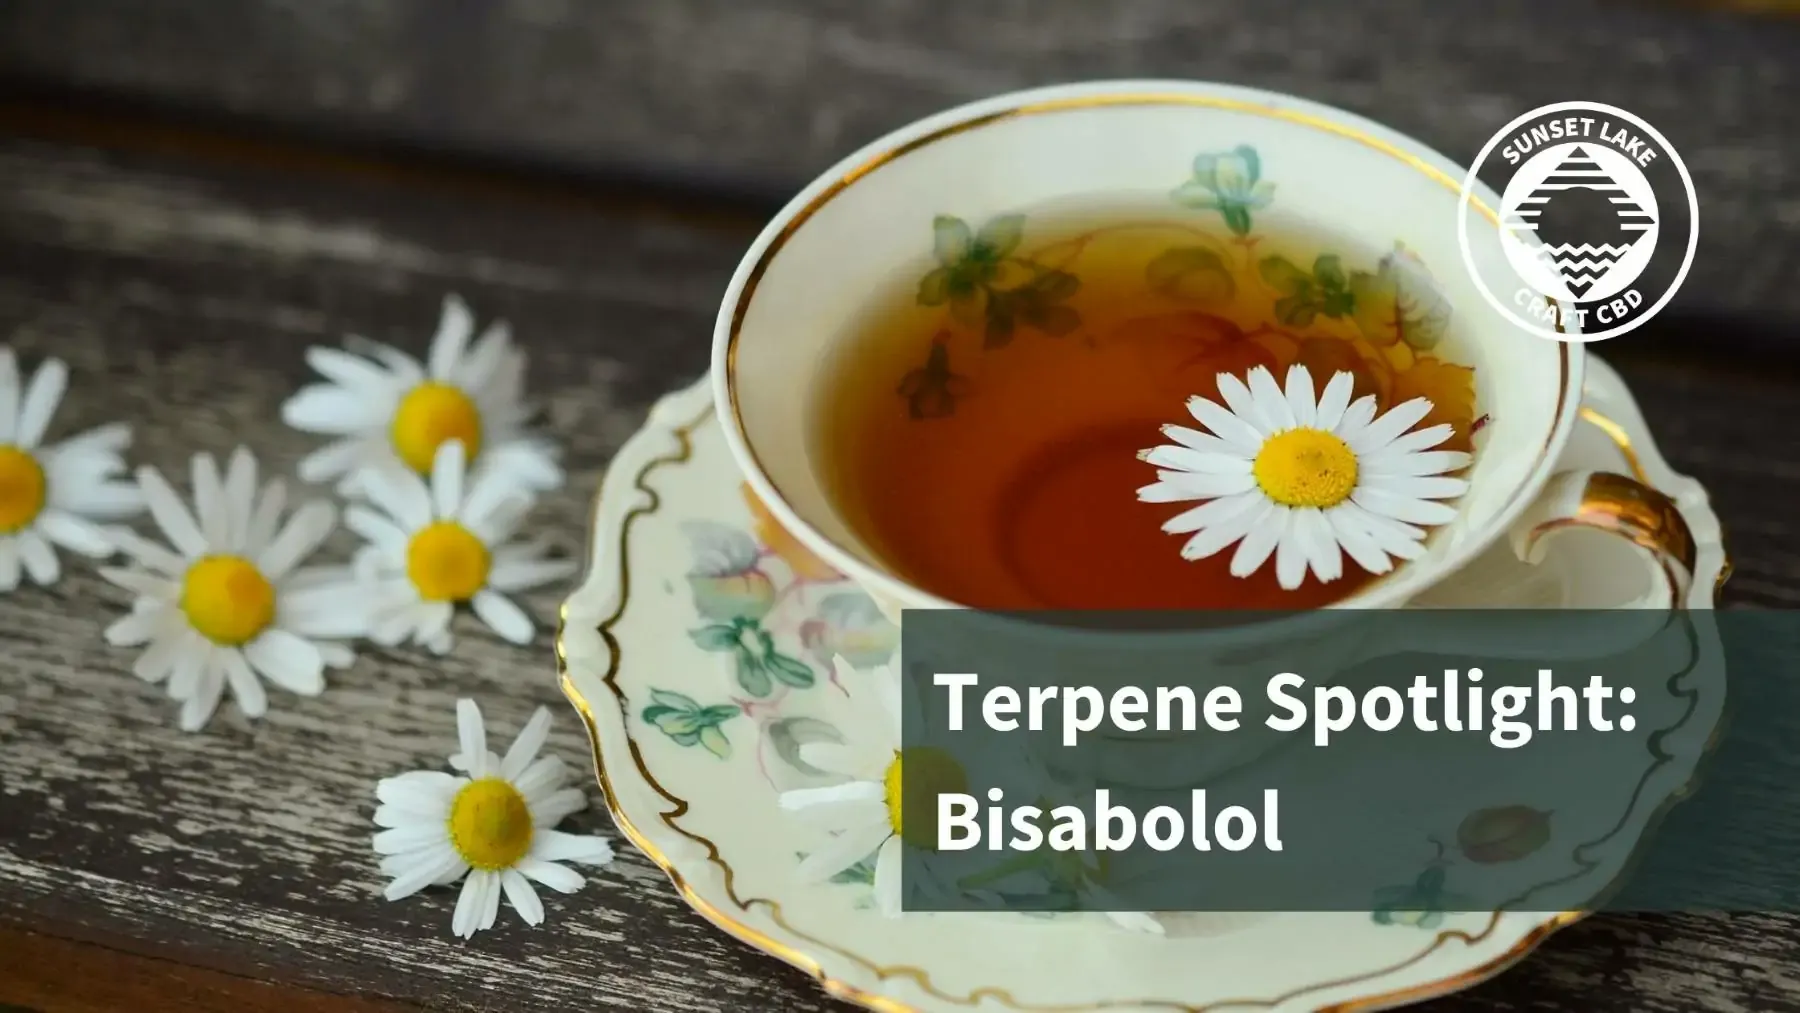 A cup of chamomile tea with the text "terpene spotlight: bisabolol"